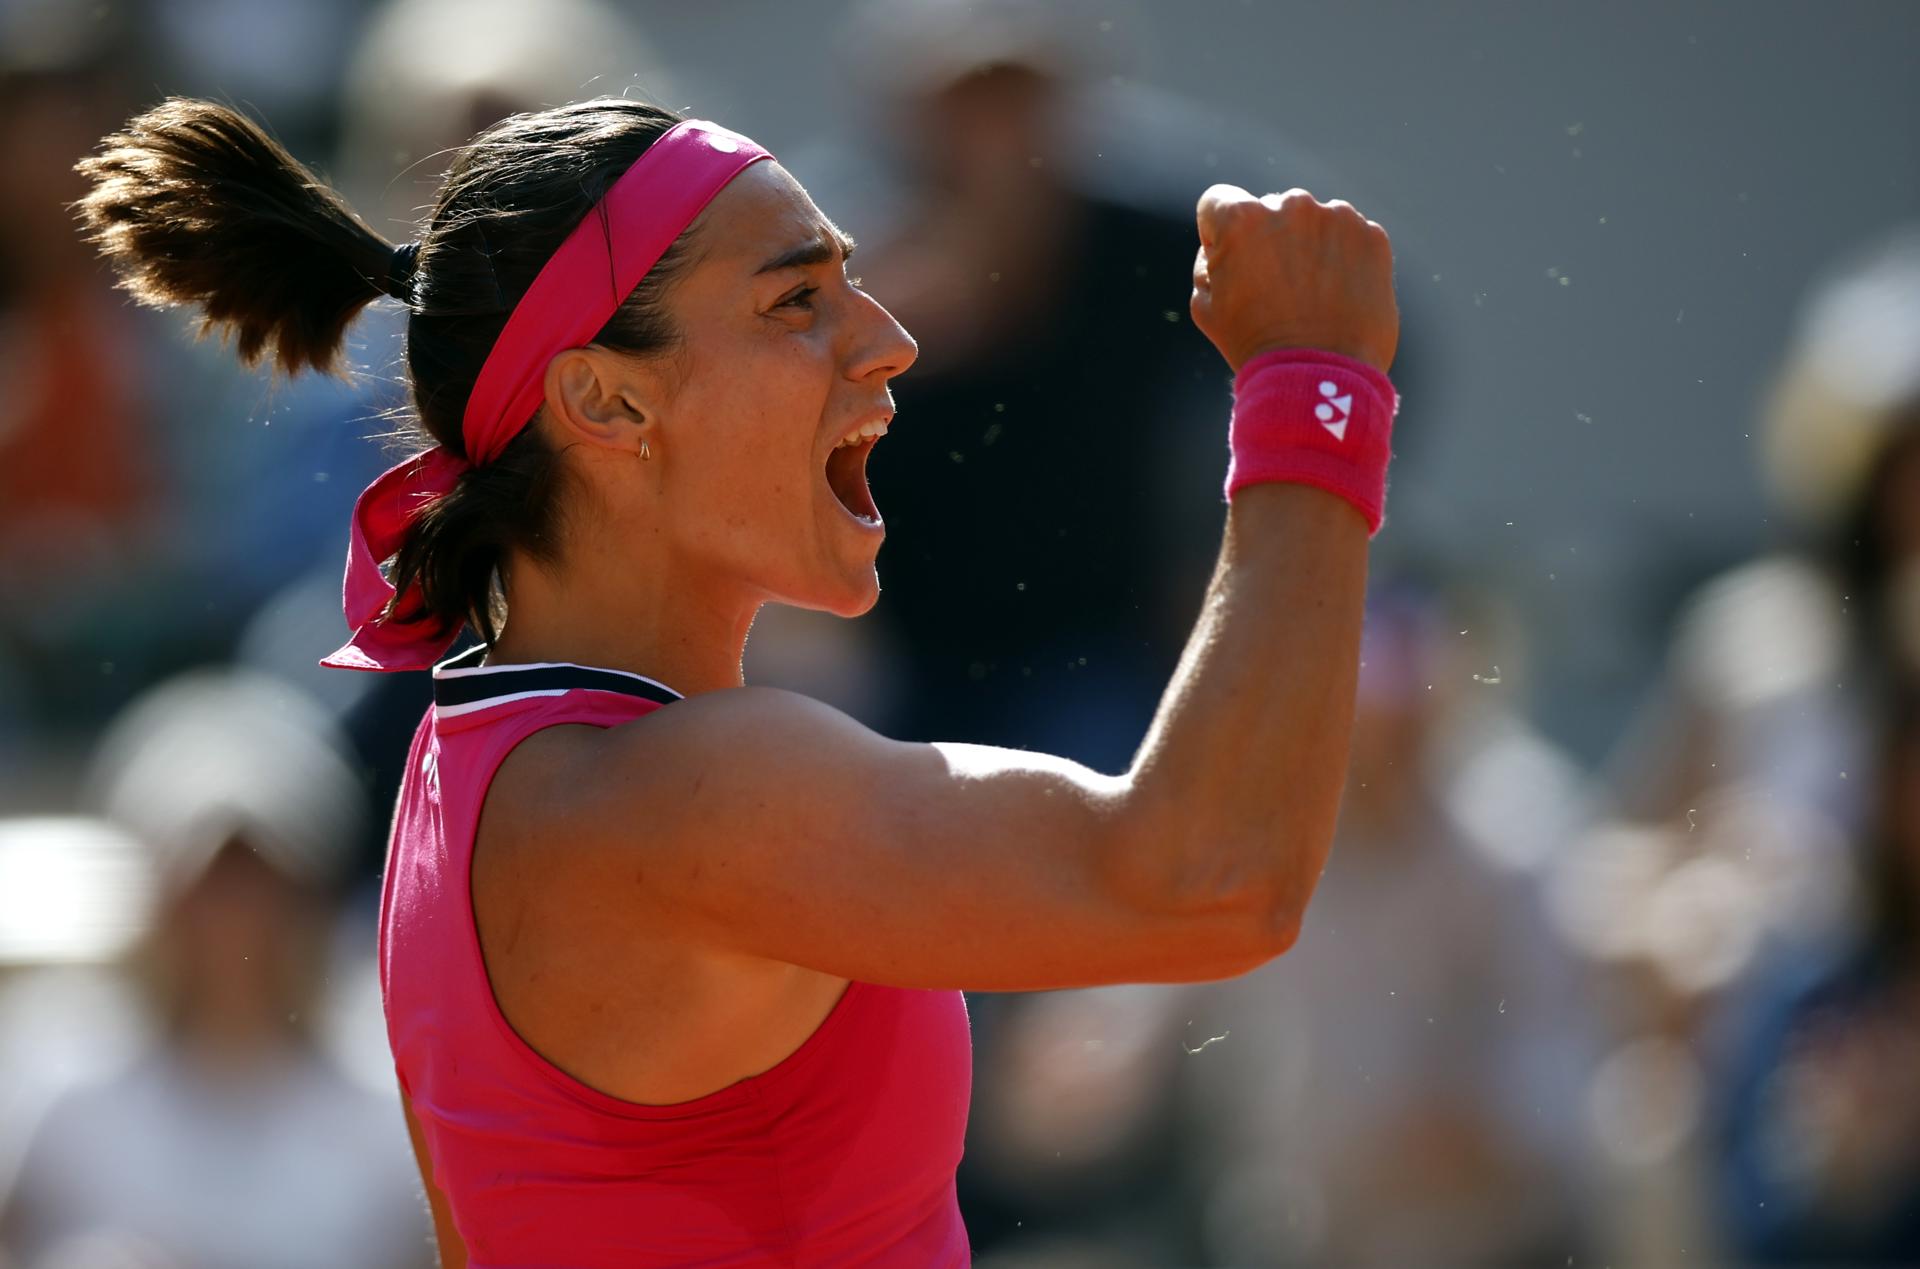 Caroline Garcia of France reacts during her French Open first-round match against Wang Xiyu of China on 29 May 2023 in Paris, France. Garcia pulled out a 7-6 (7-4), 4-6, 6-4 victory. EFE/EPA/YOAN VALAT
